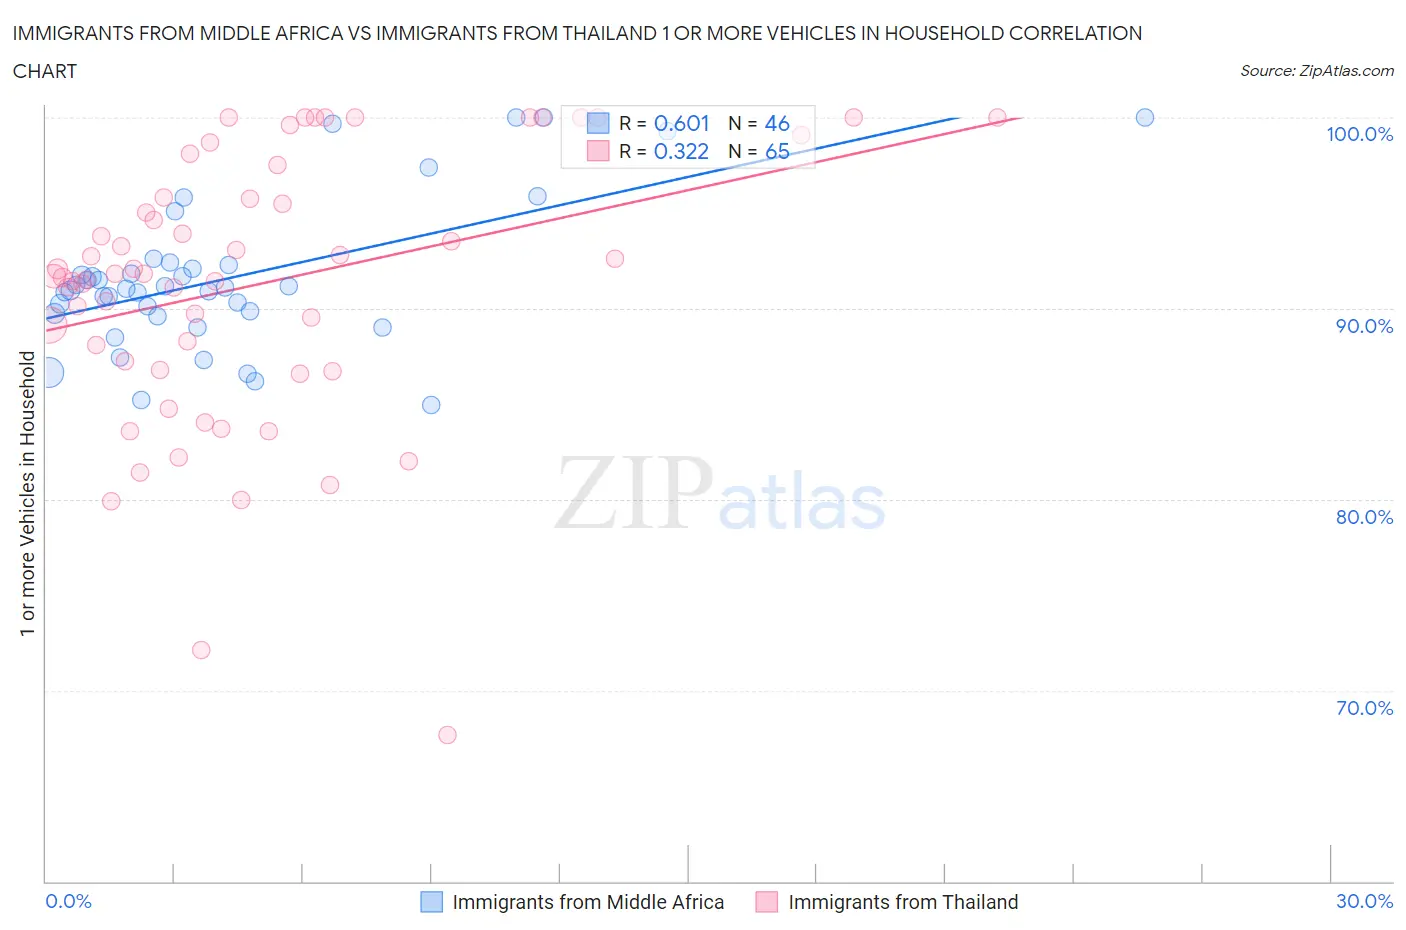 Immigrants from Middle Africa vs Immigrants from Thailand 1 or more Vehicles in Household